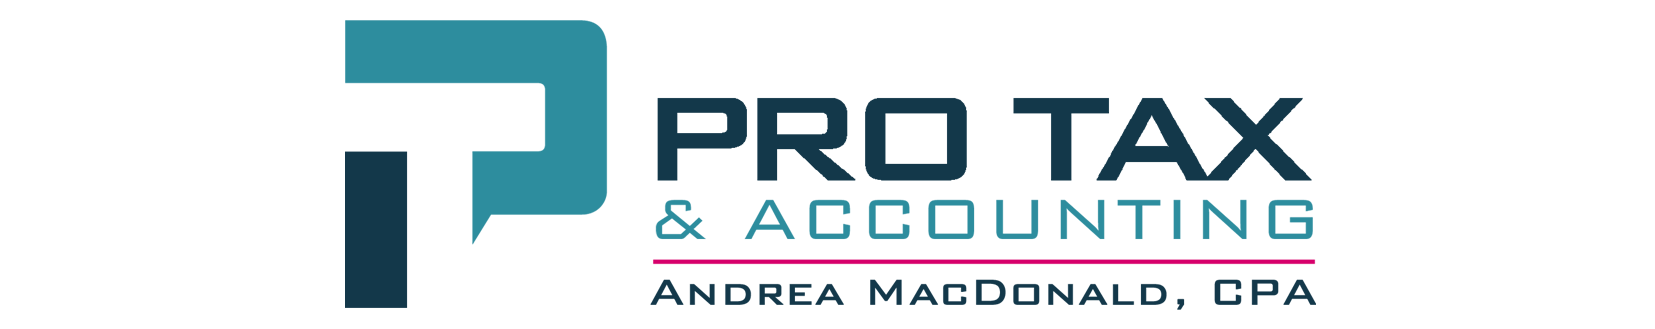 New Pro Tax & Accounting vertical logo in blue, teal and raspberry mobile version